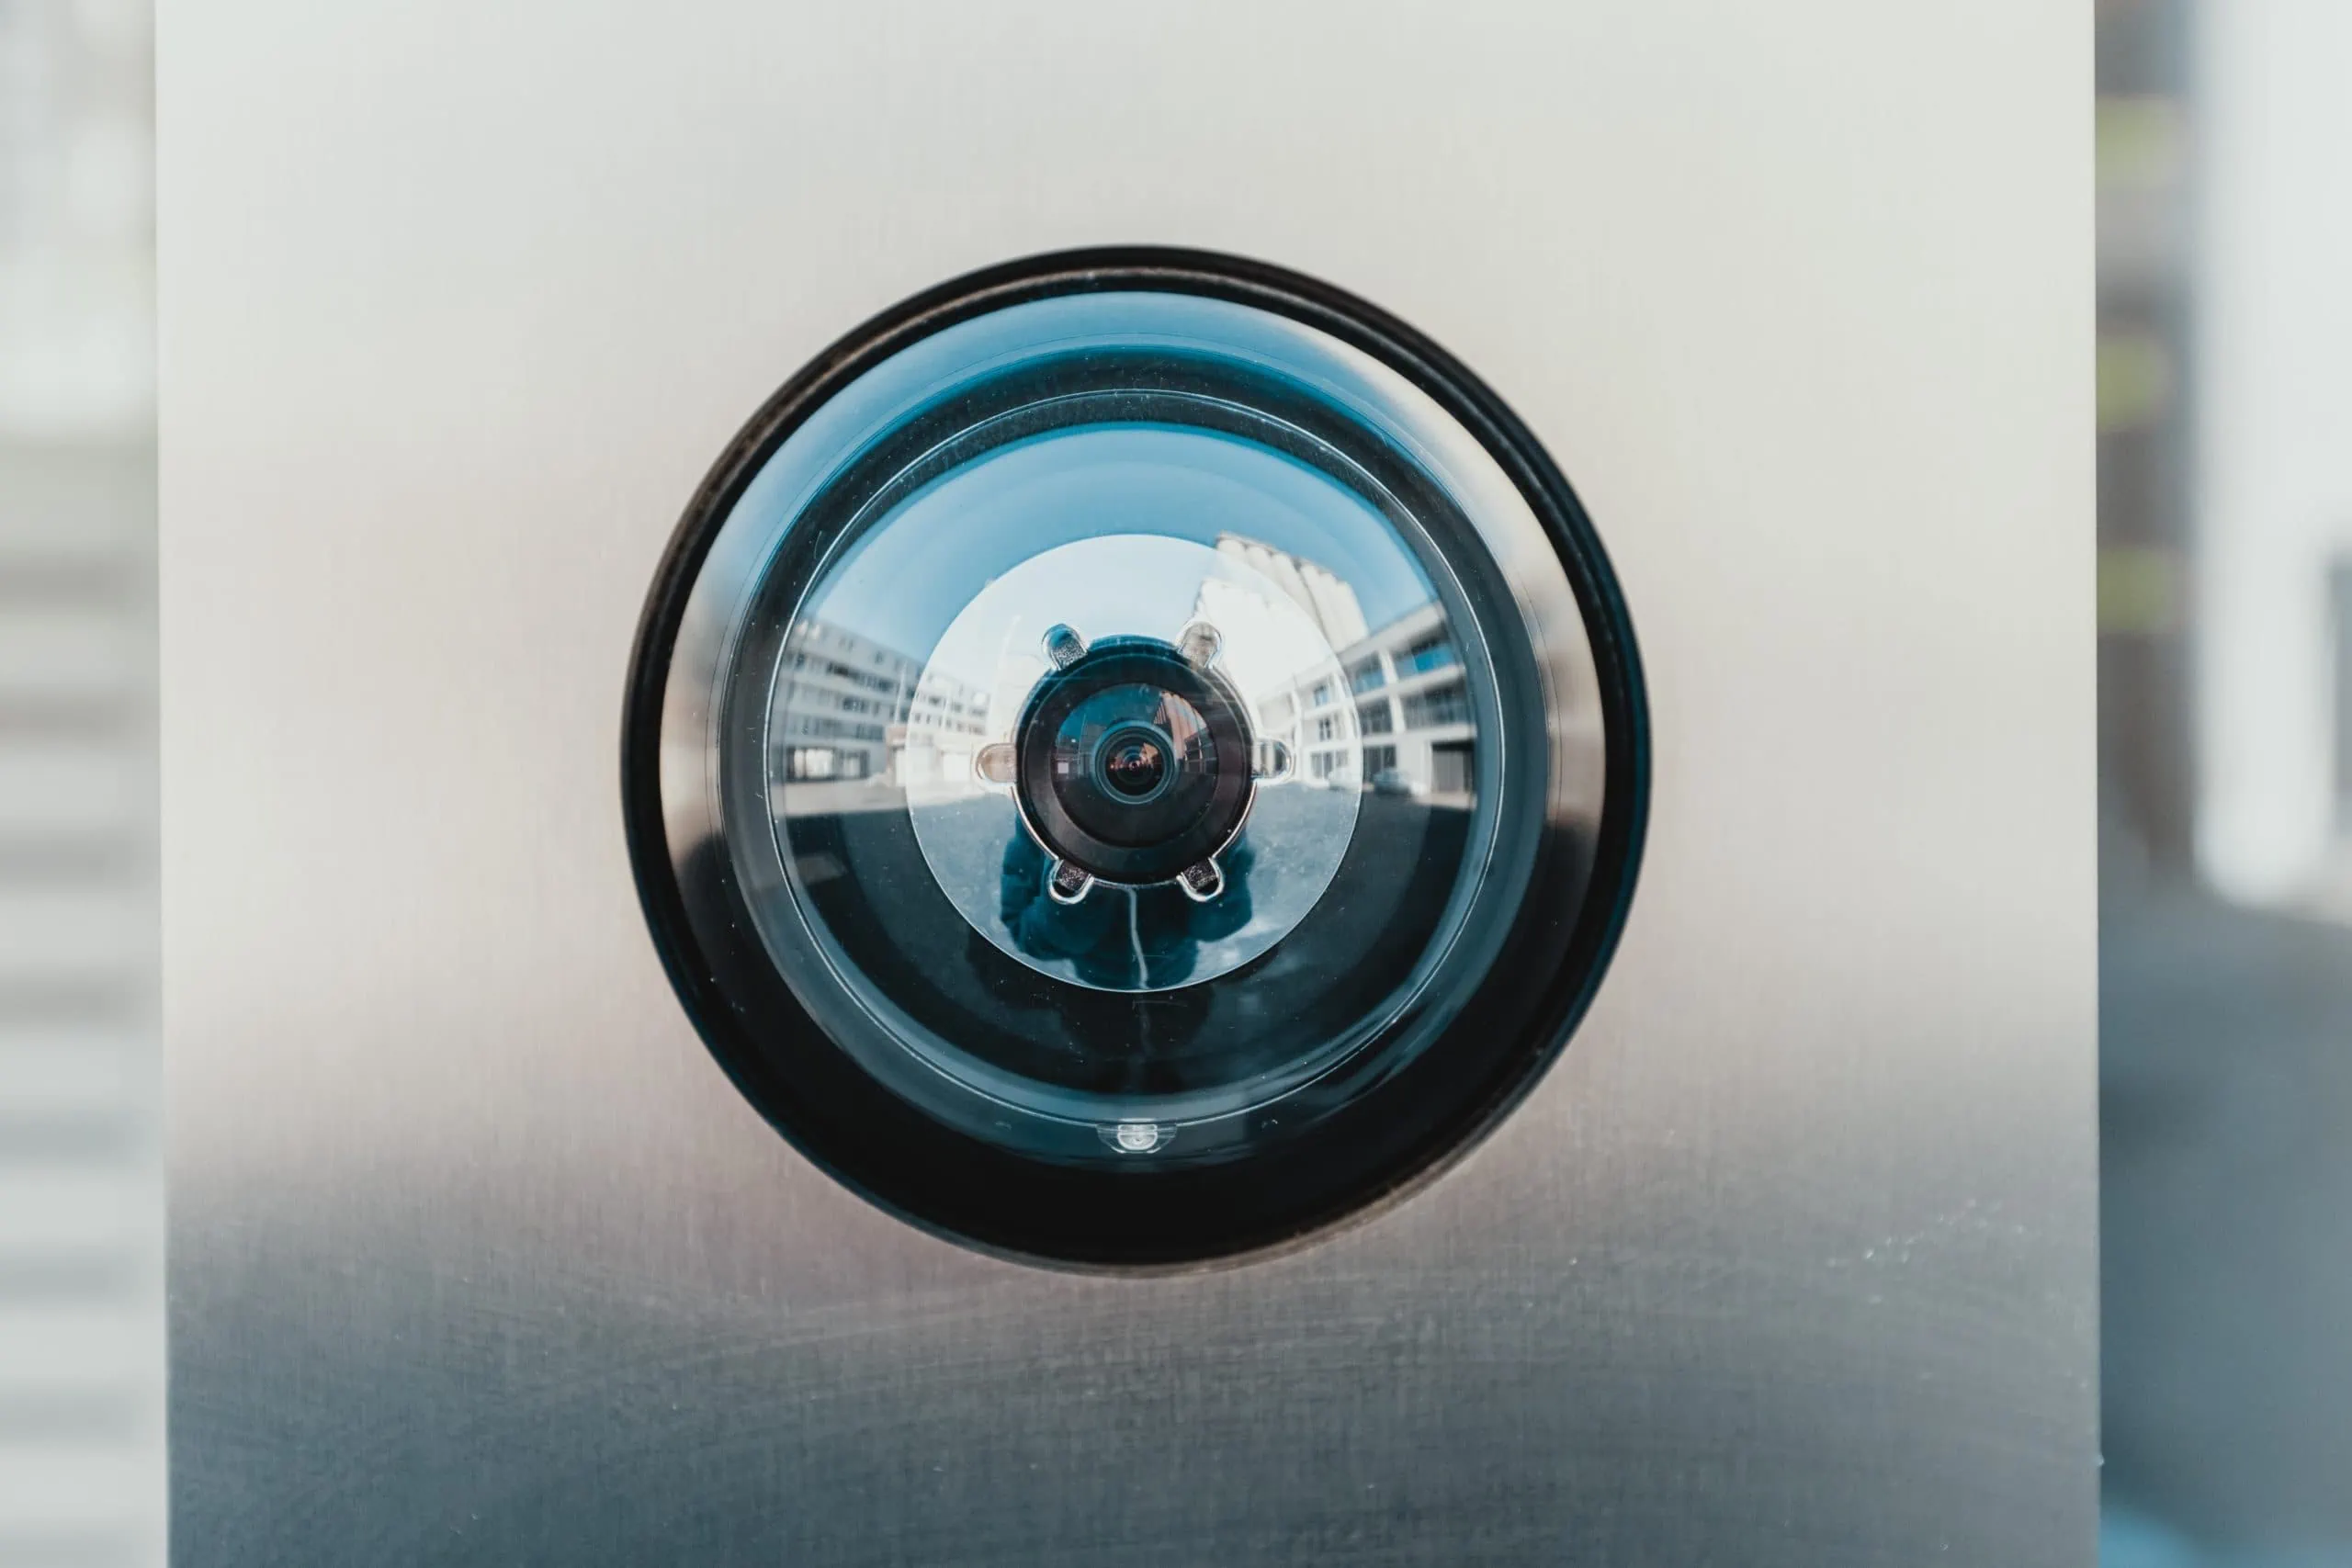 All organizations should have 16 camera wireless security system